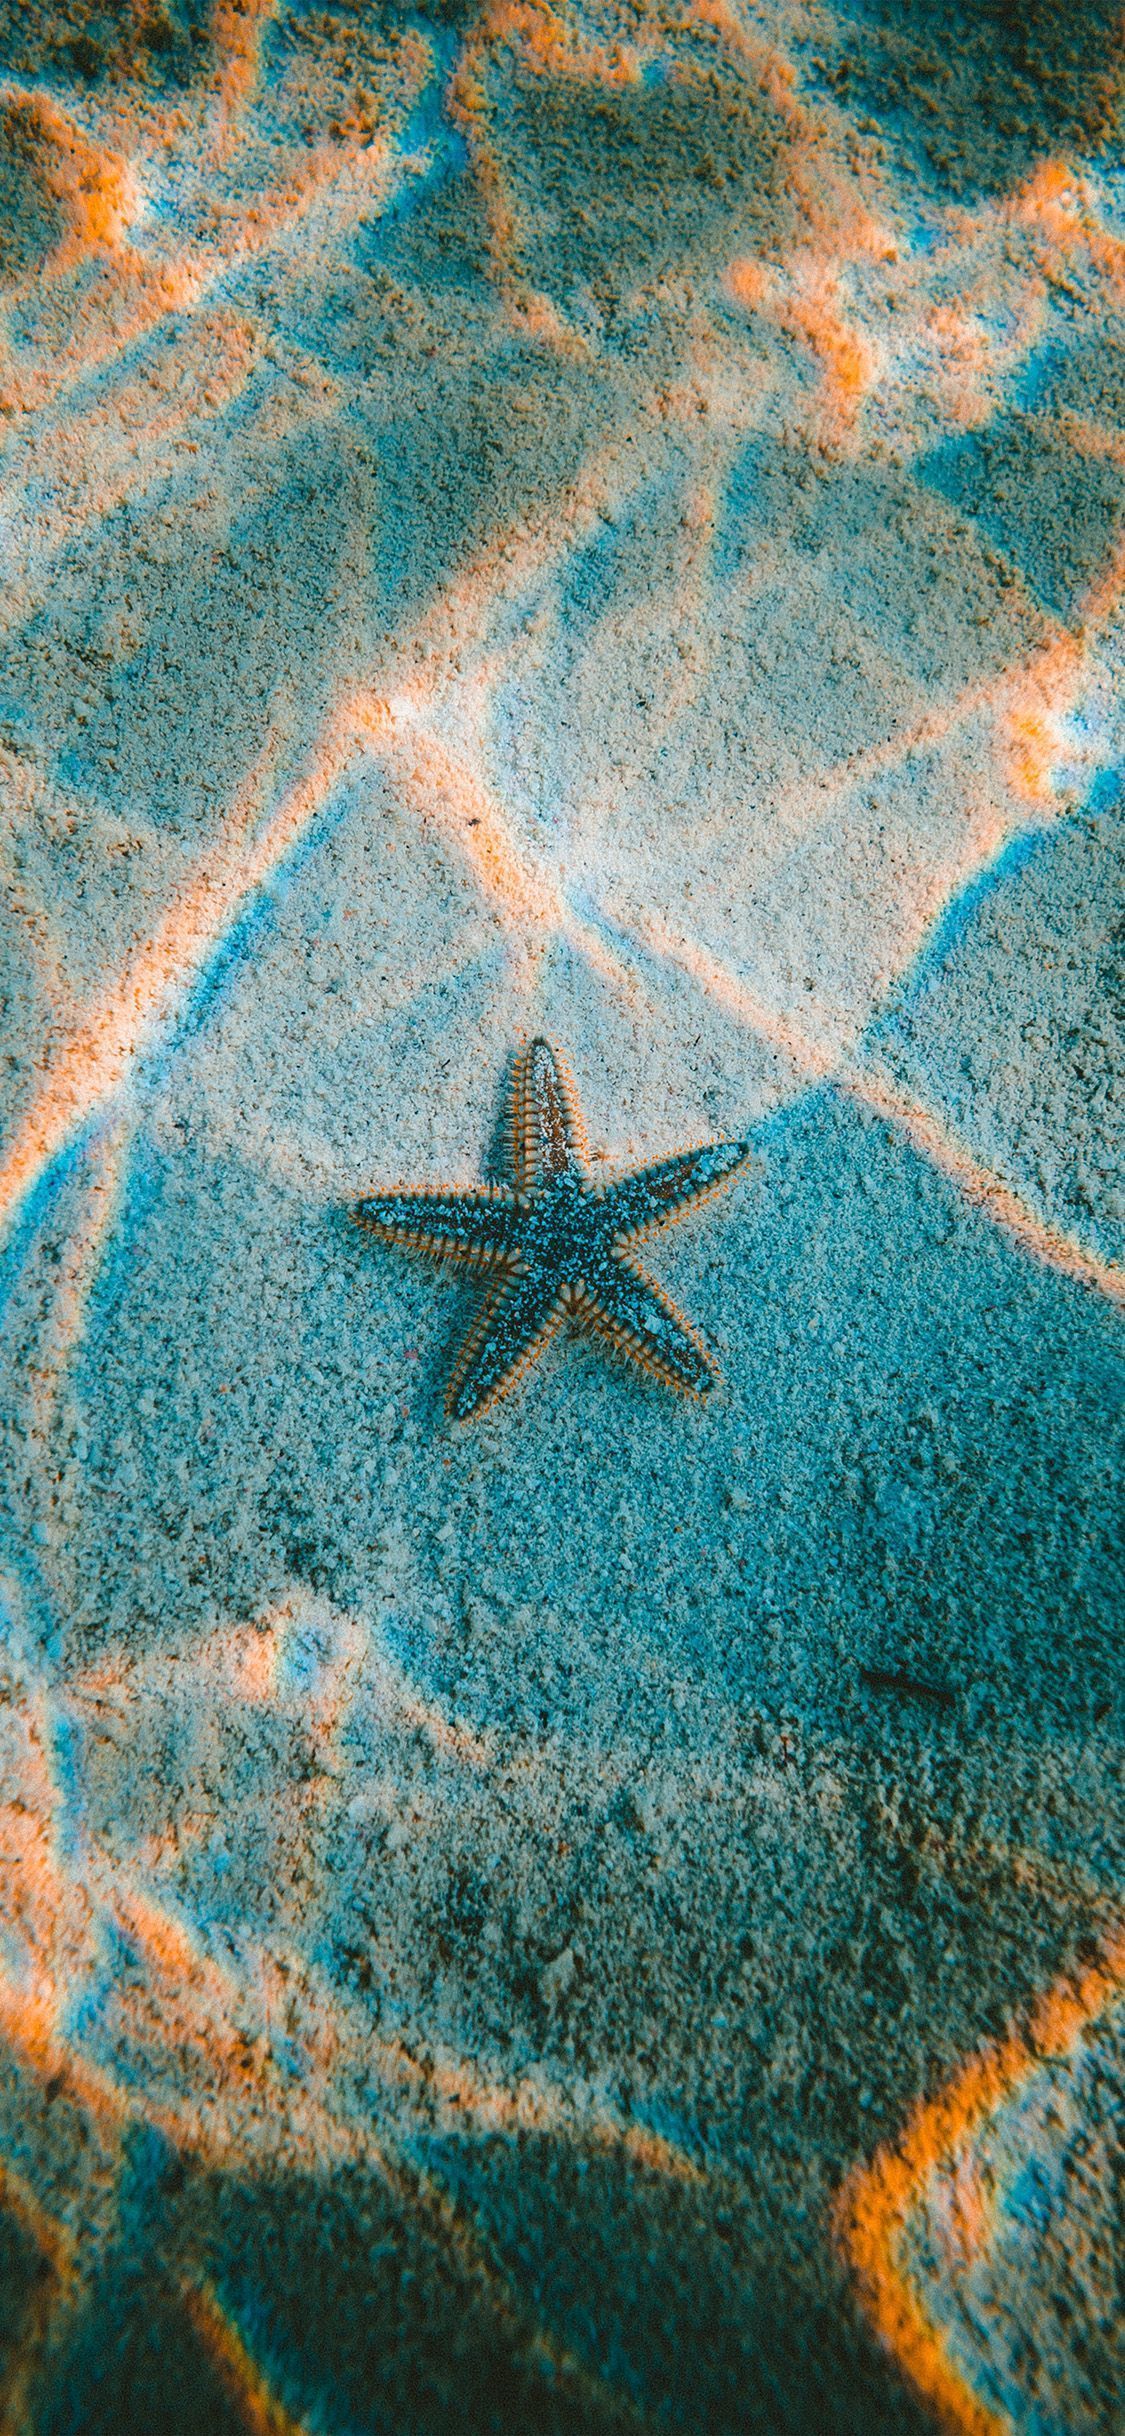 A starfish is floating in the water - Underwater, starfish